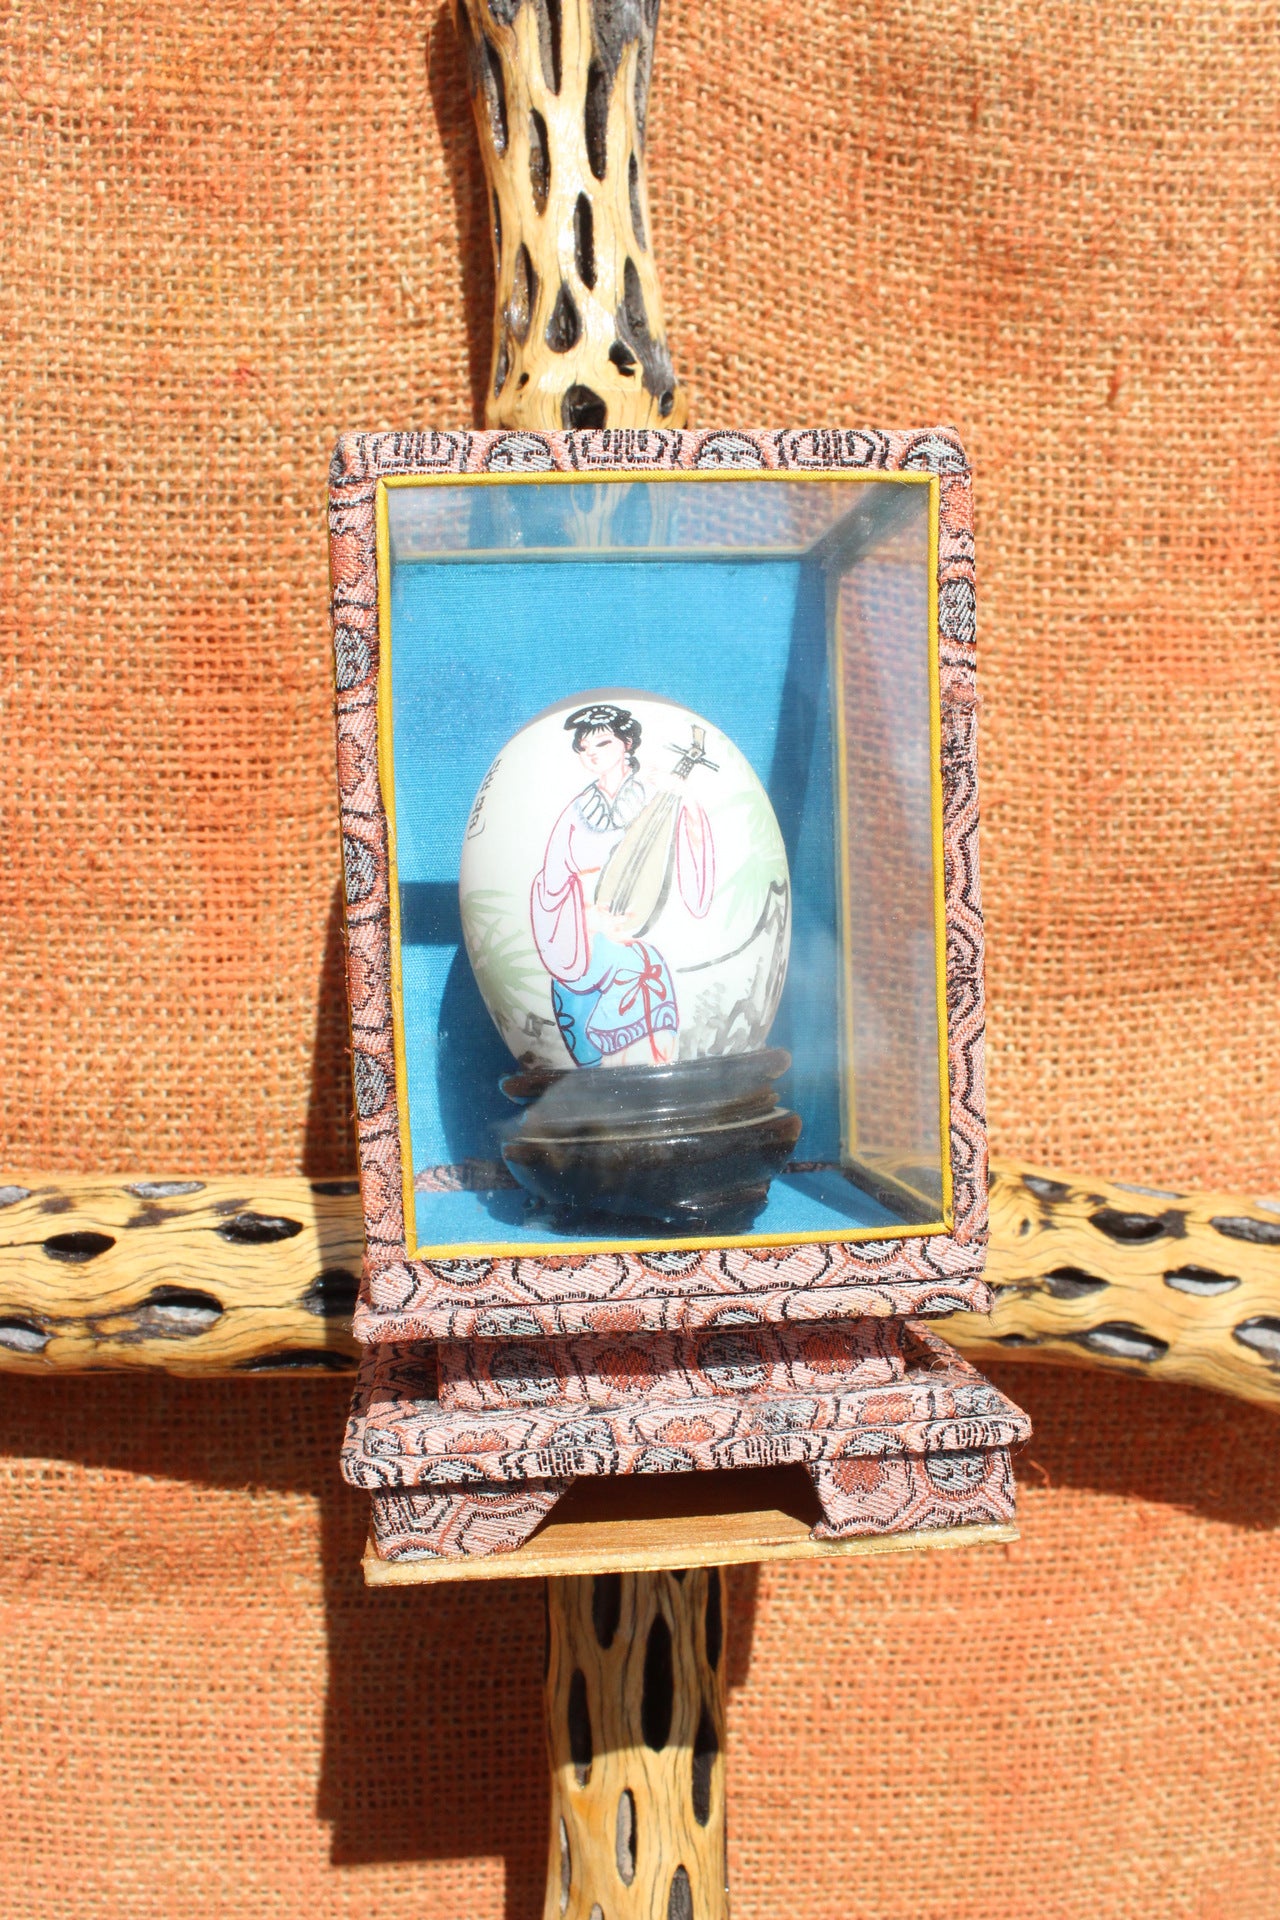 Lady On The Egg In a Box On a Cross